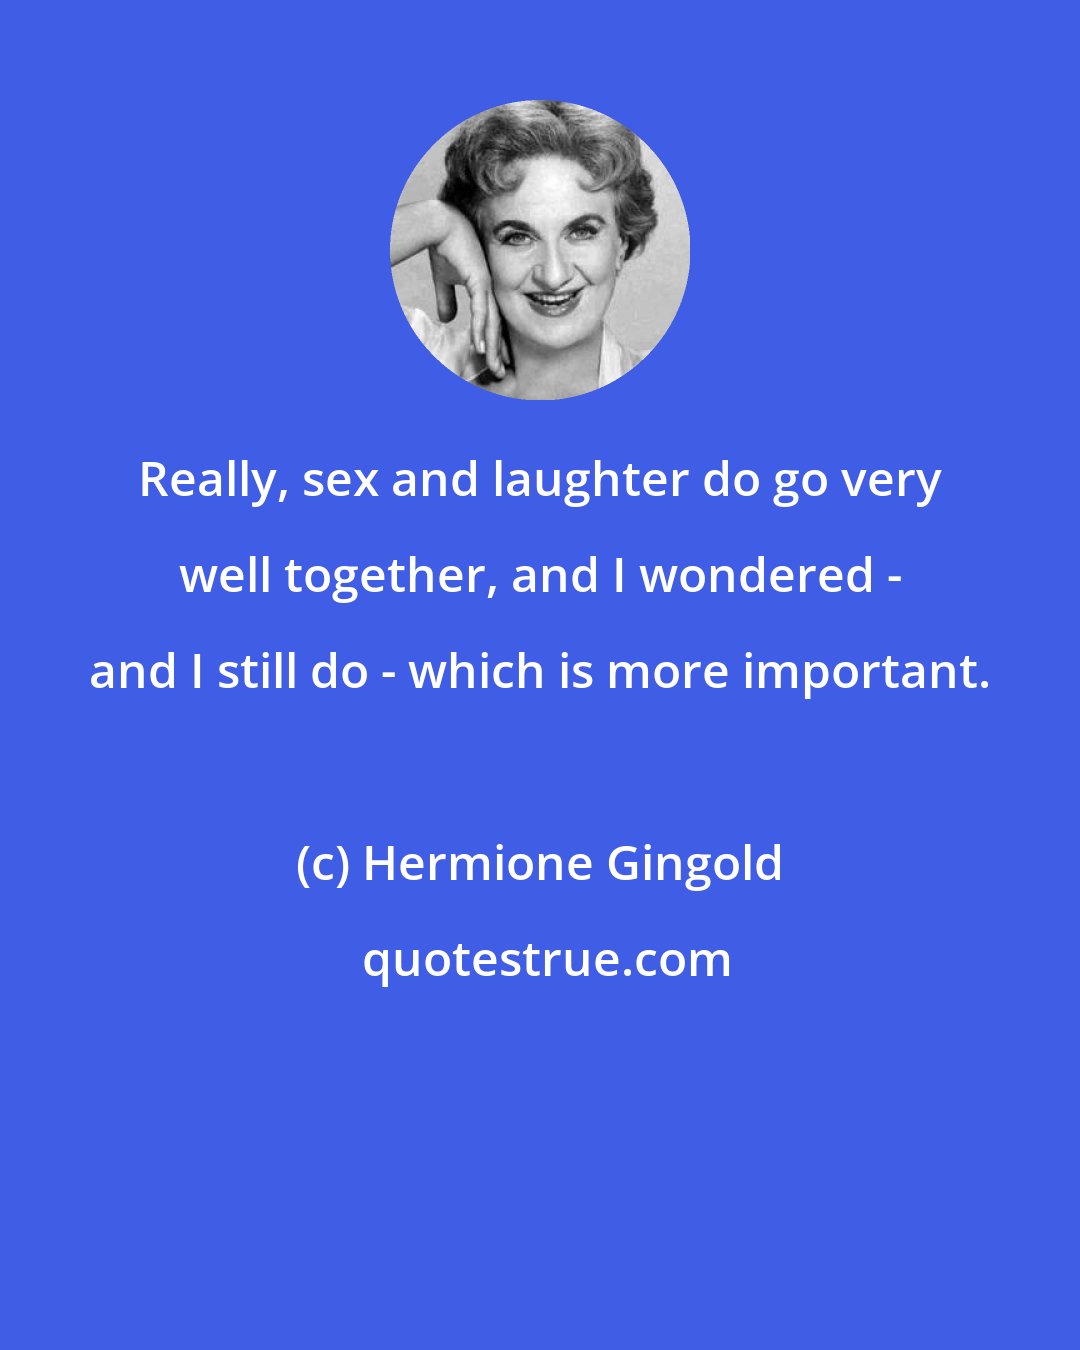 Hermione Gingold: Really, sex and laughter do go very well together, and I wondered - and I still do - which is more important.